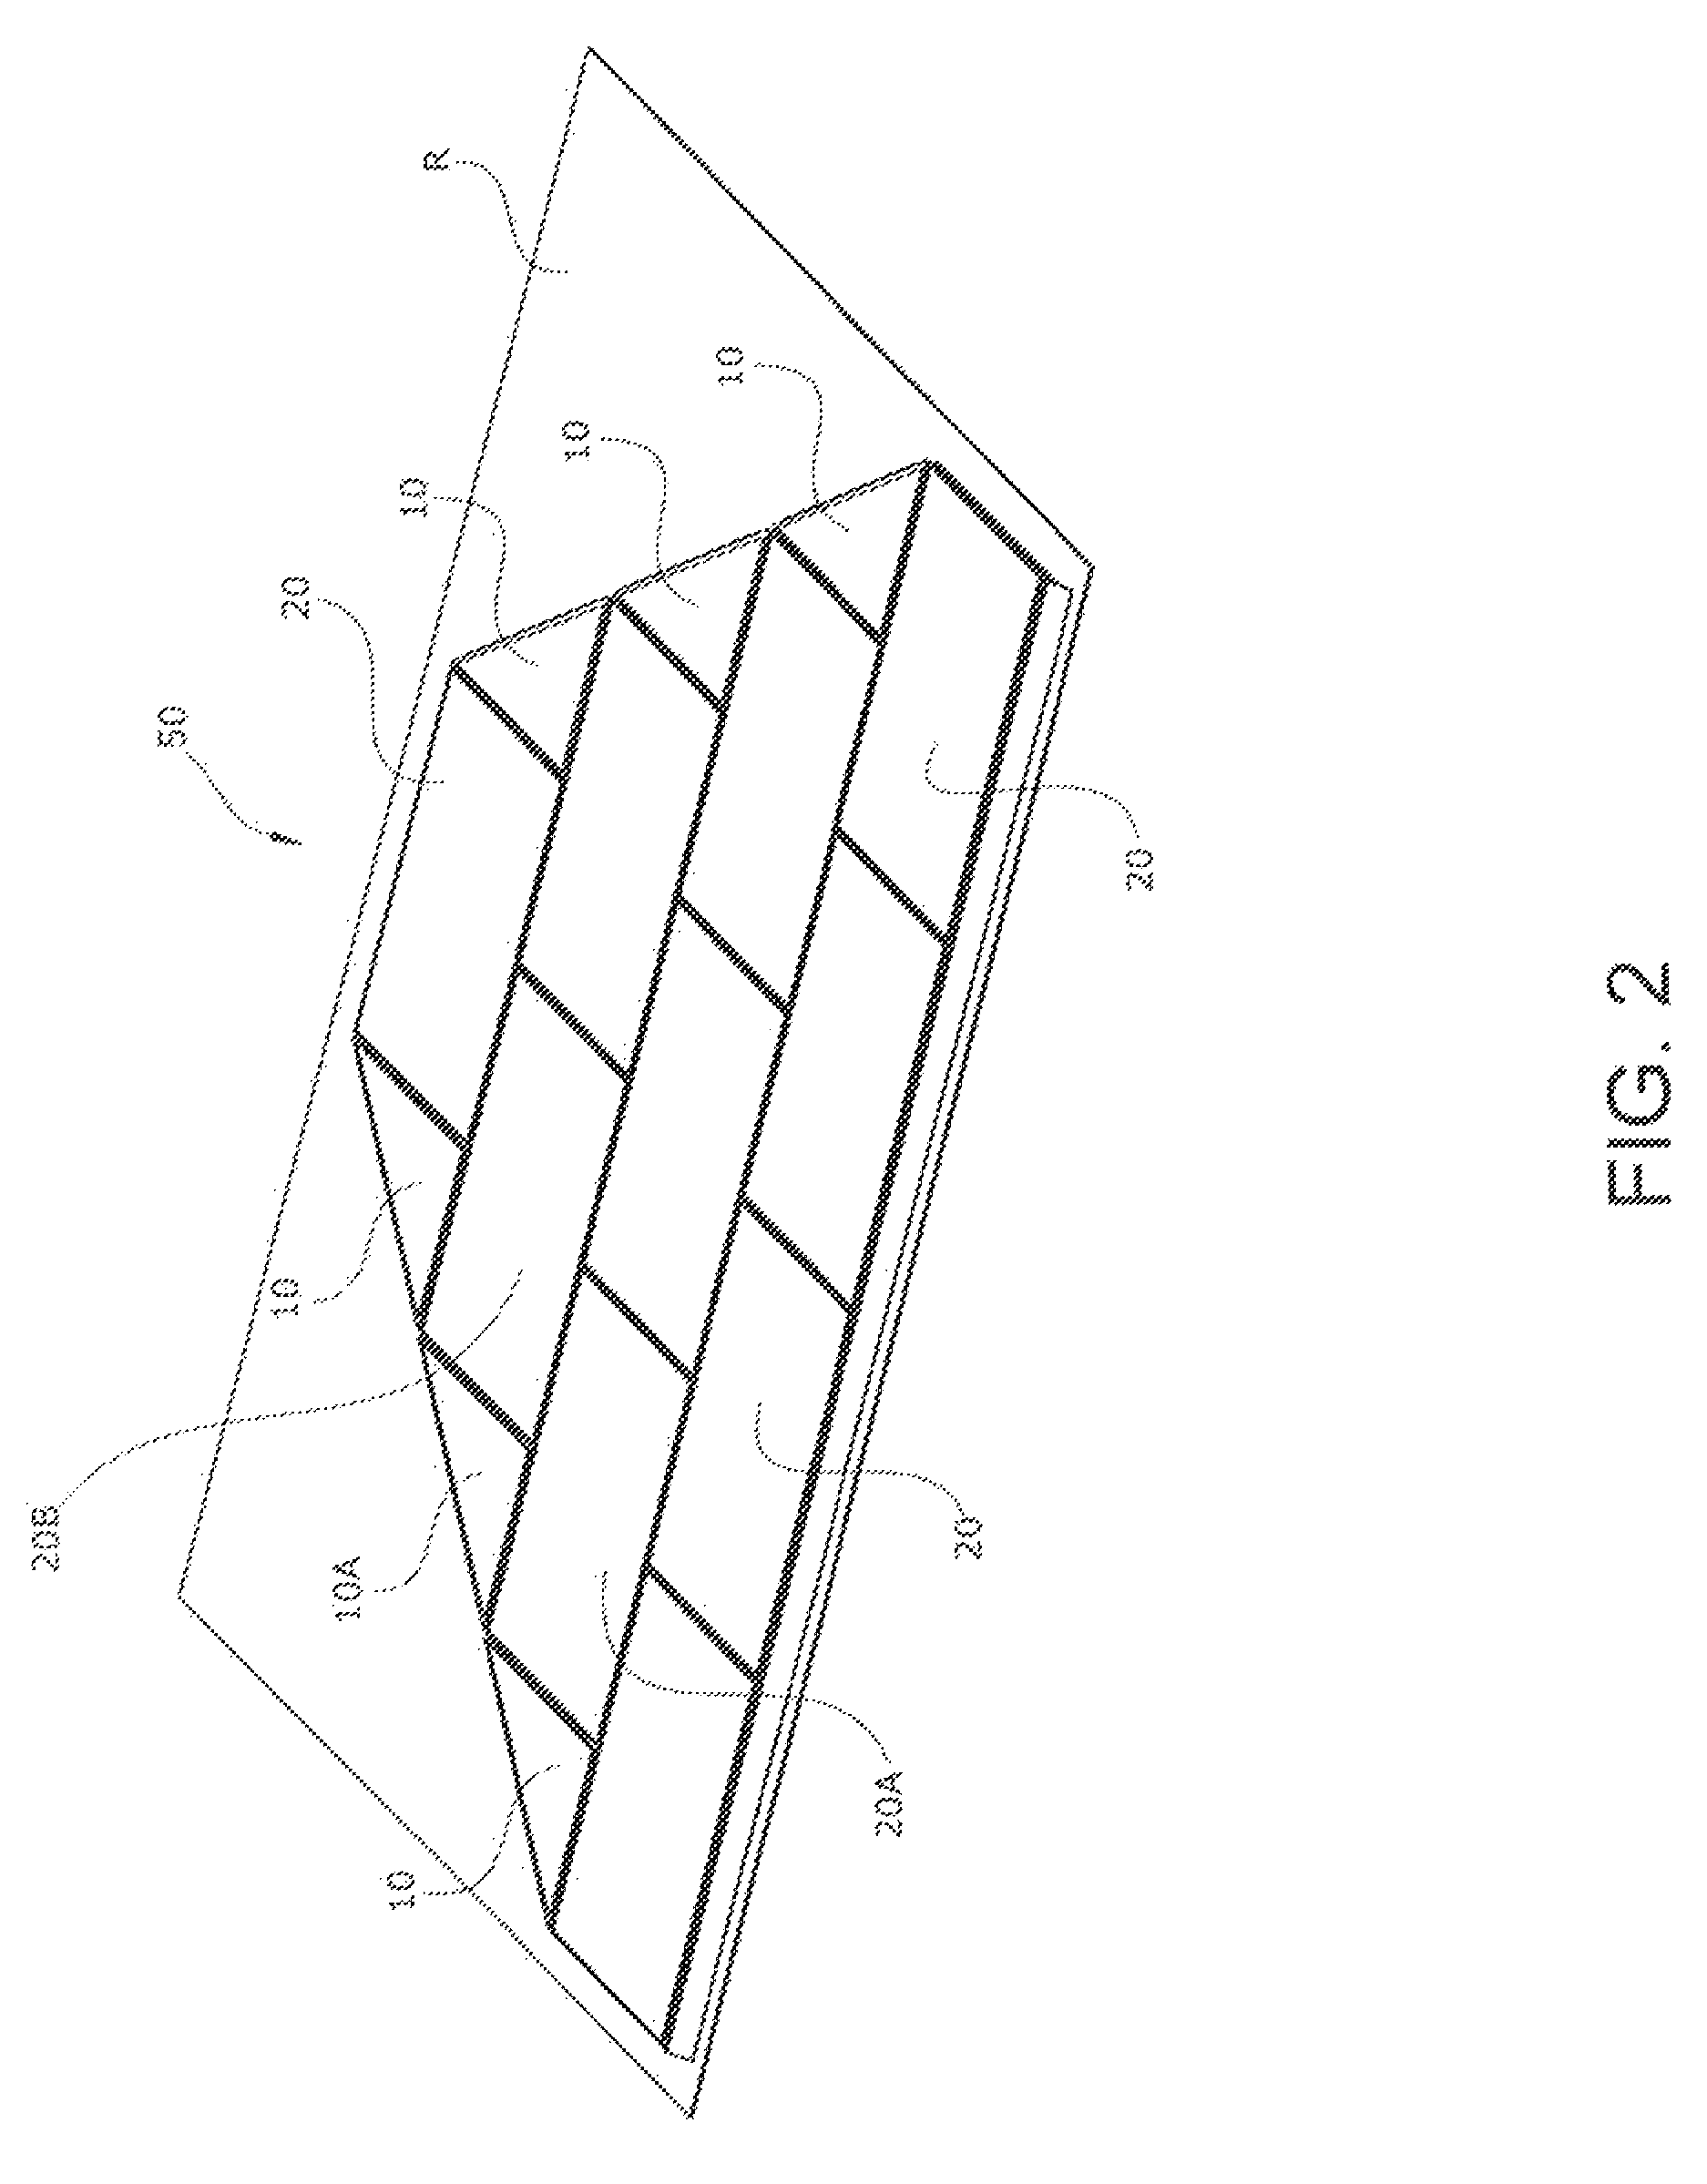 Imitation solar module for use in a staggered or irregularly shaped solar array